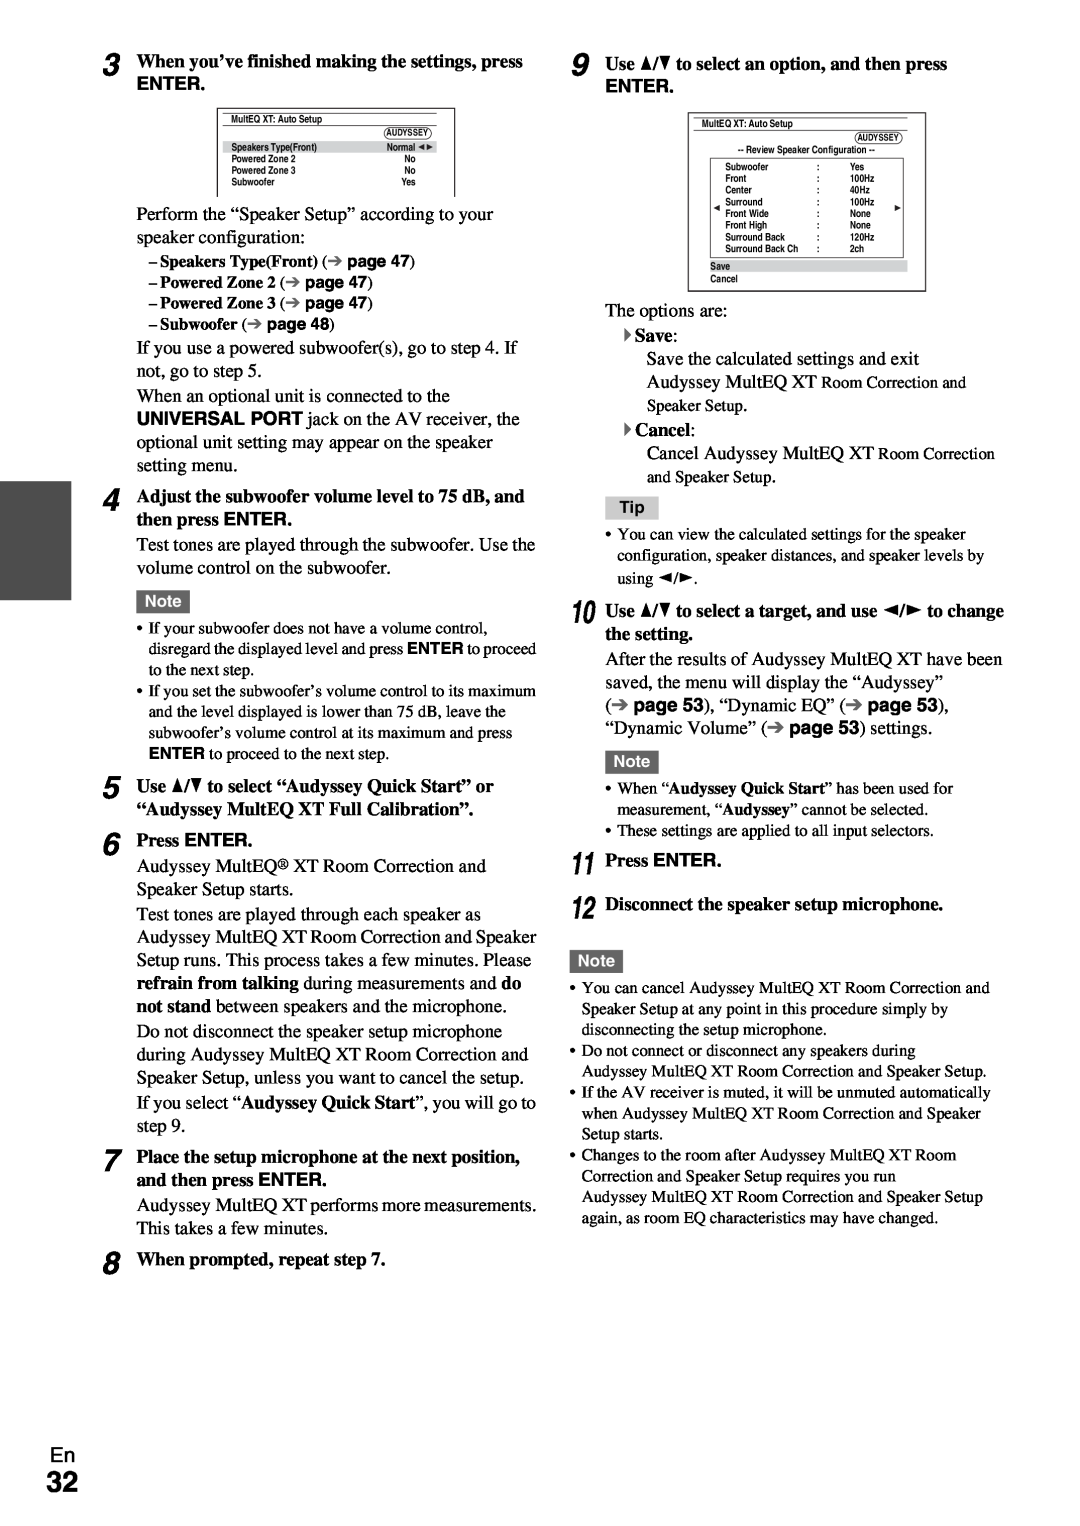 Onkyo TX-NR1009 instruction manual When you’ve finished making the settings, press, Enter 